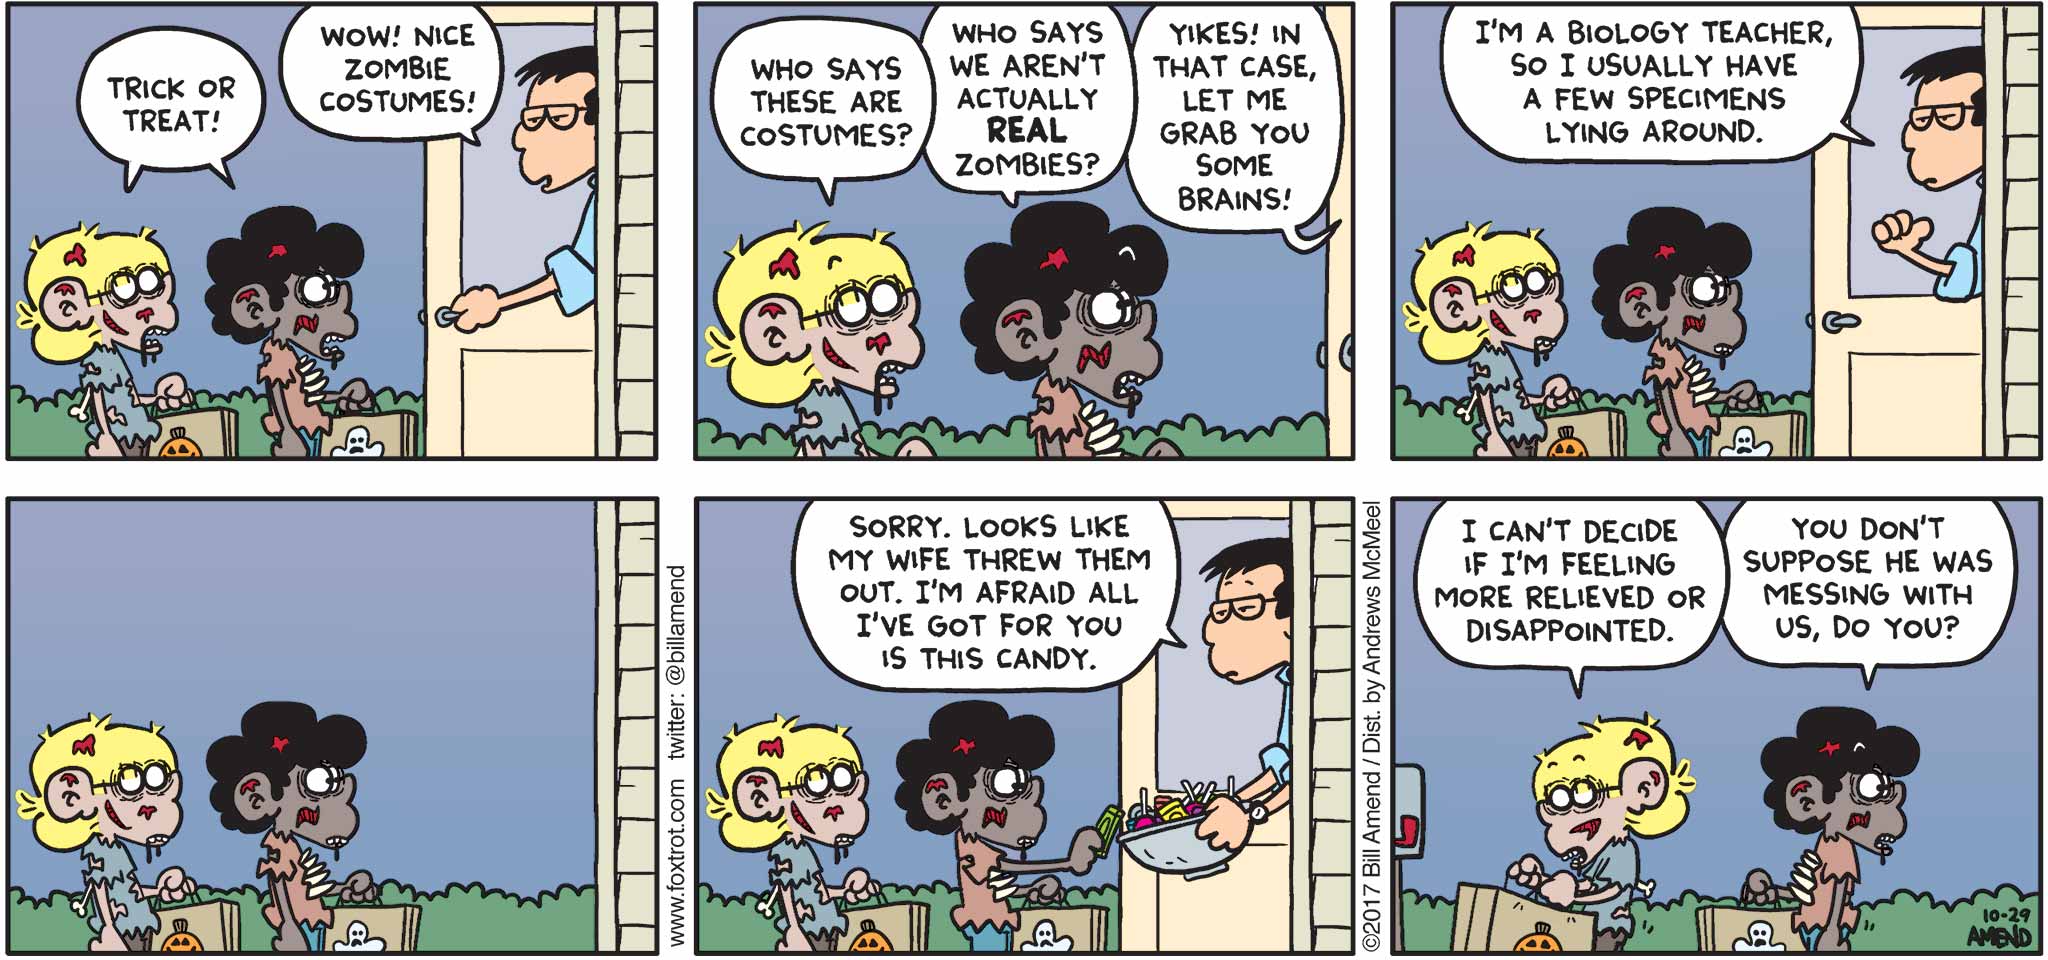 FoxTrot by Bill Amend - "Brains" published October 29, 2017 - Jason and Marcus say: Trick or treat! Neighbor says: Wow! Nice zombie costumes! Jason says: Who says these are costumes? Marcus says: Who says we aren't actually REAL zombies? Neighbor says: Yikes! In that case, let me grab you some brains! I'm a biology teacher, so I usually have a few specimens lying around. Sorry, looks like my wife threw them out. I'm afraid all I've got for you is this candy. Jason says: I can't decide if I'm feeling more relieved of disappointed. Marcus says: You don't suppose he was messing with us, do you? 